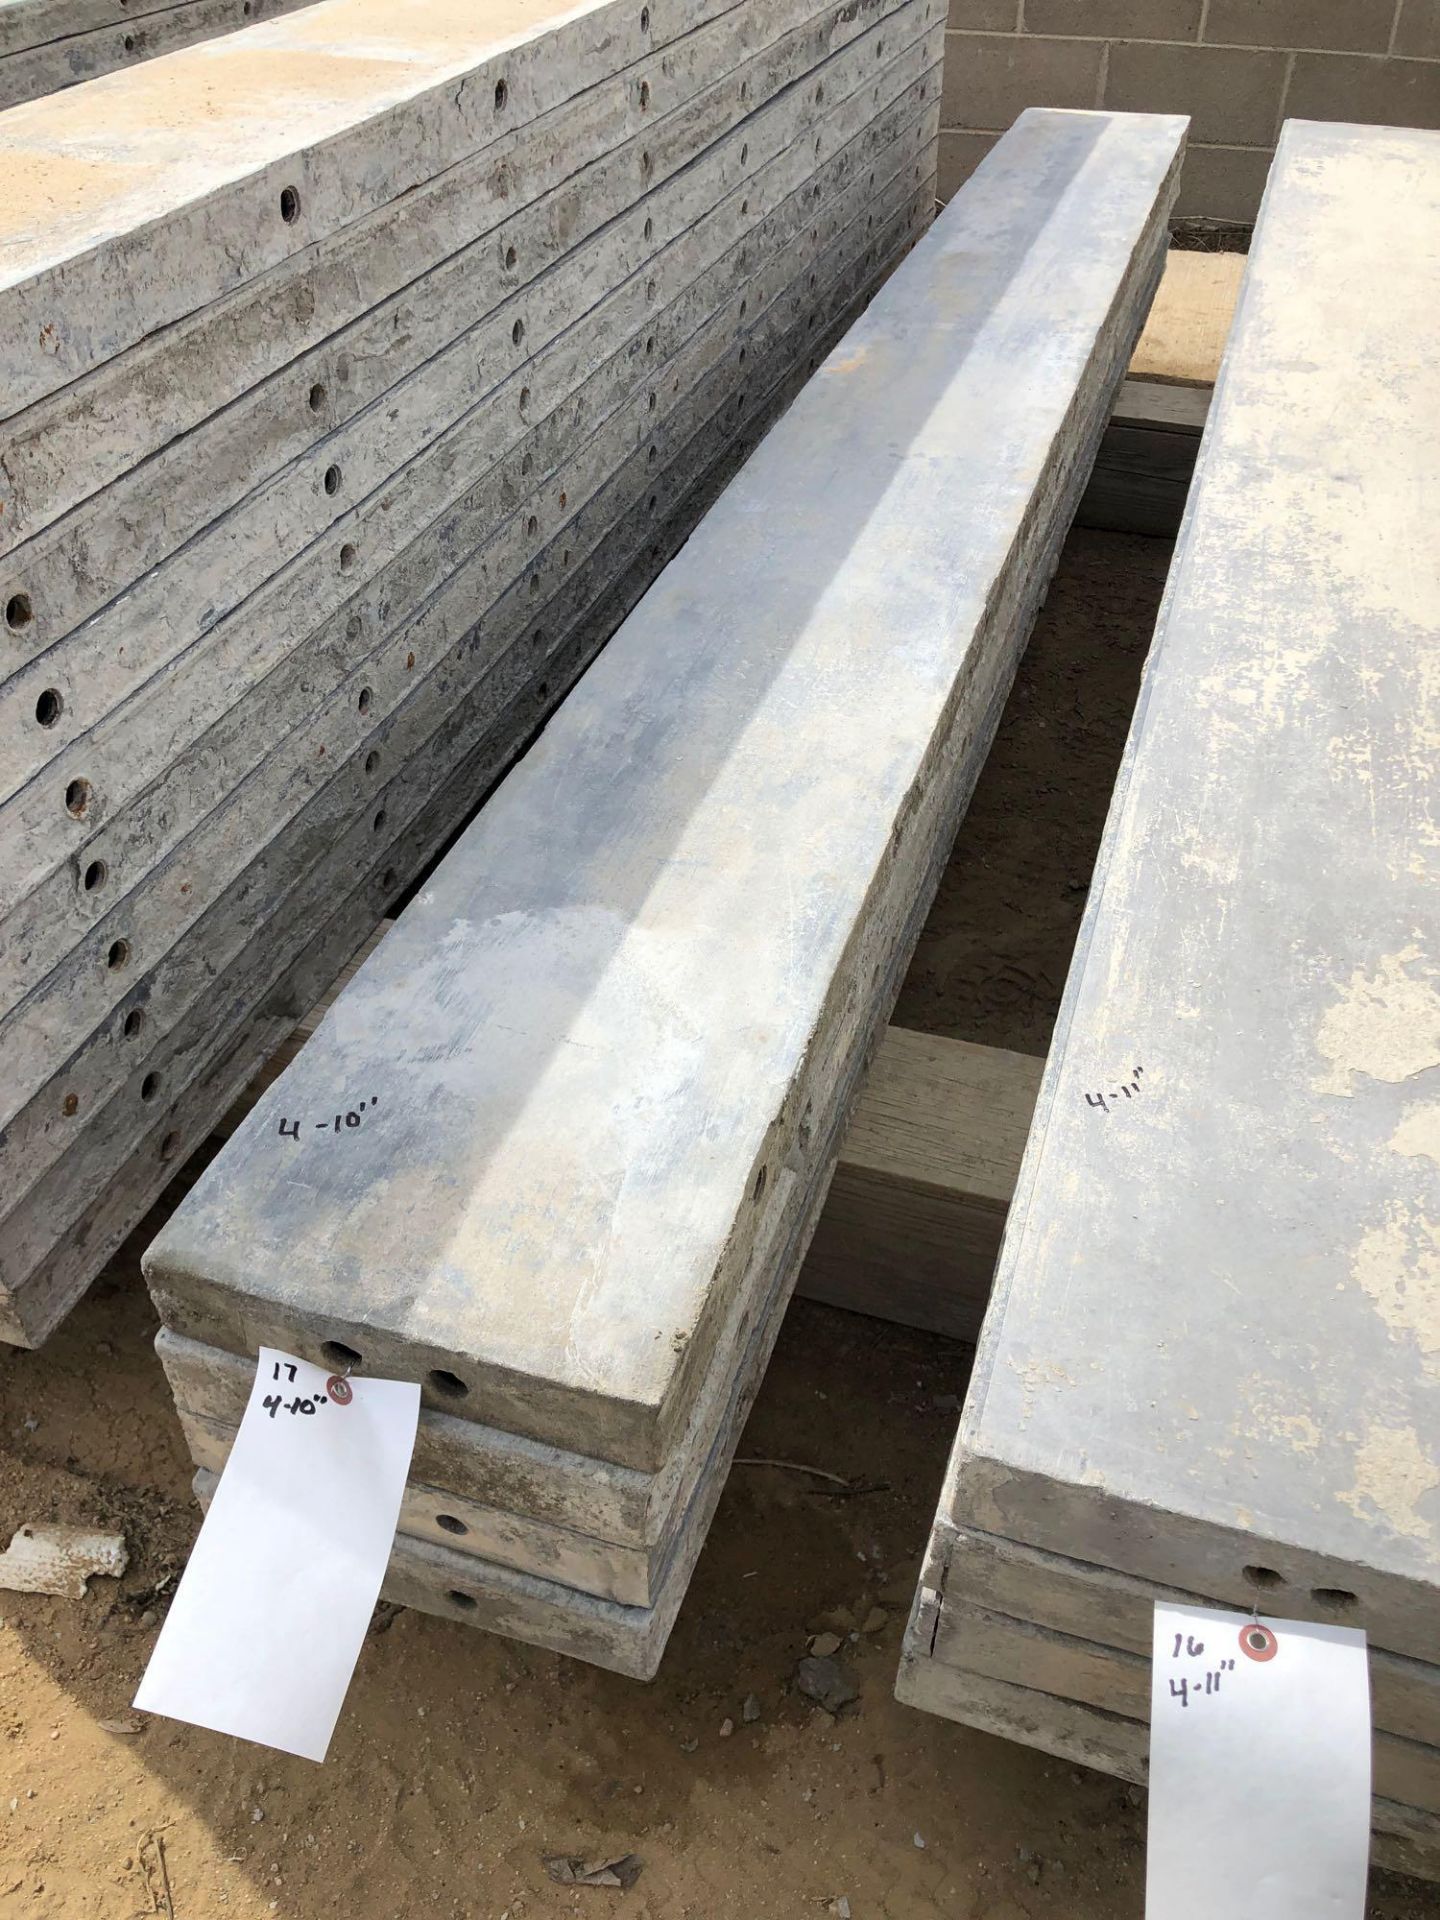 (4) 10" x 8' Wall-Ties Aluminum Concrete Forms, Smooth 6-12 Hole Pattern. Located at 6180 W 10th St,